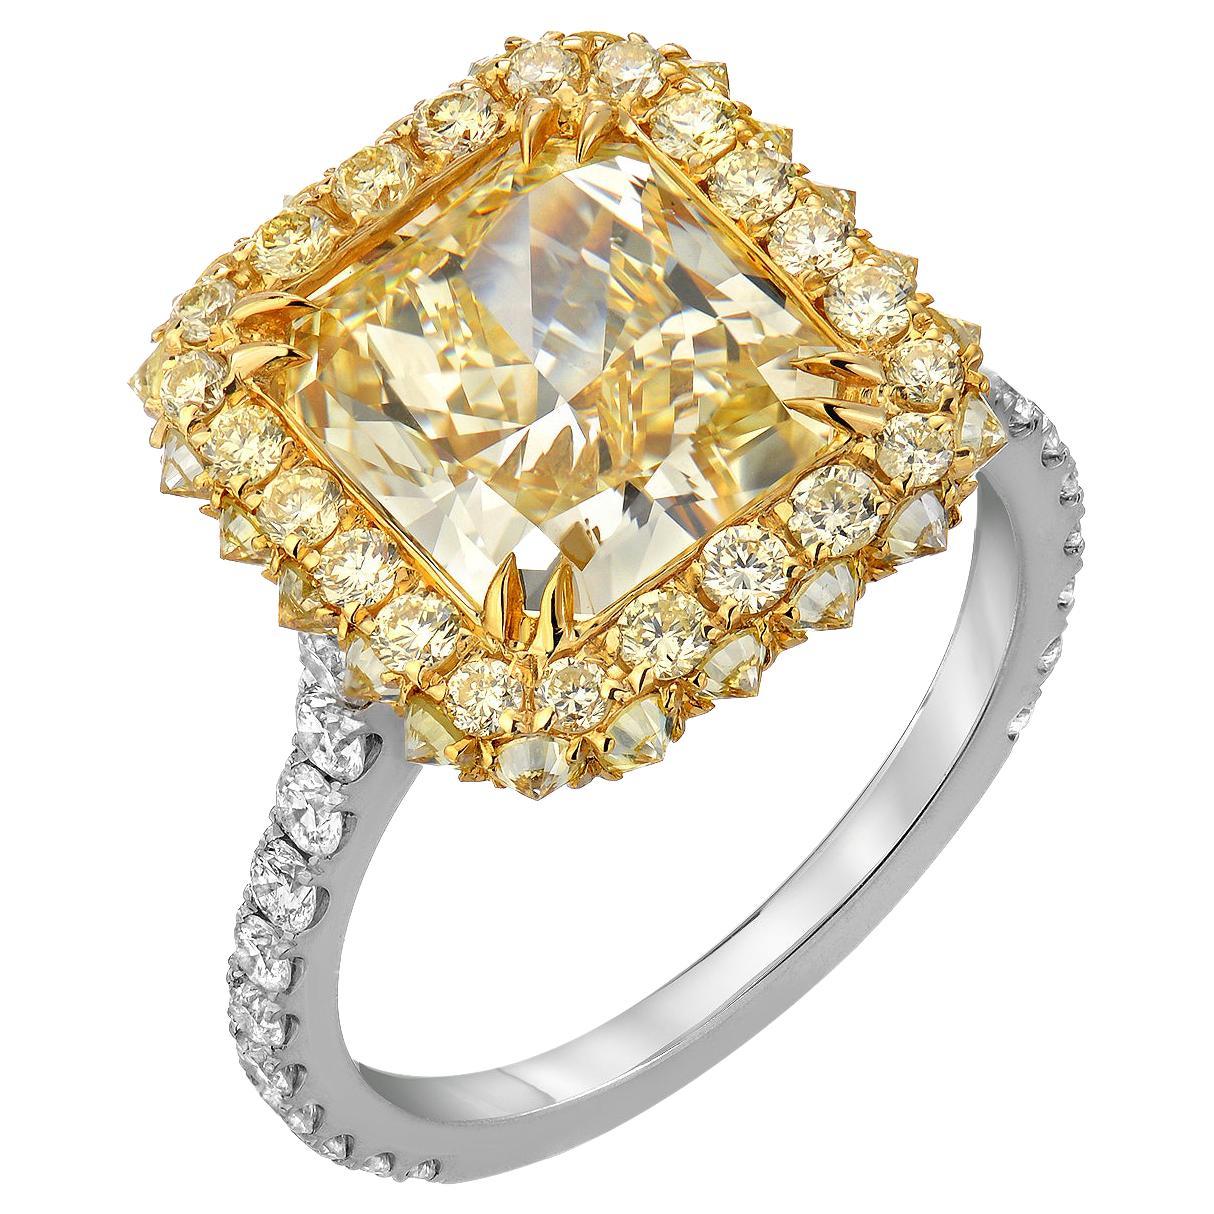 Fancy Light Yellow Diamond Ring 3.78 Carat Radiant Cut GIA Certified For Sale